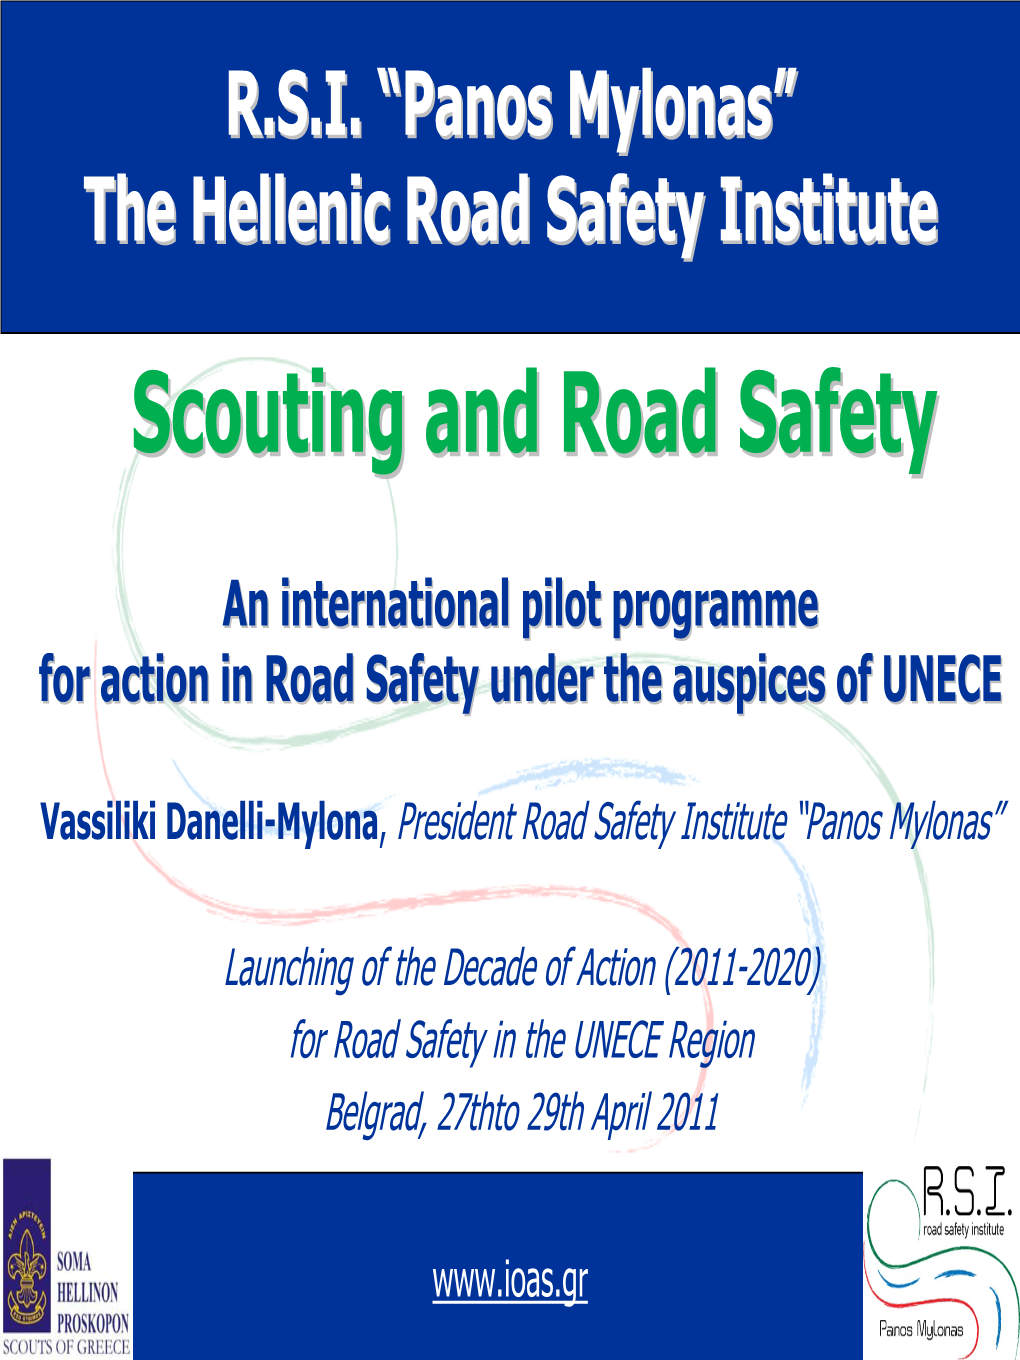 Scouting and Road Safety Agencies Call for Others to Join Us in This Vital Global Programme